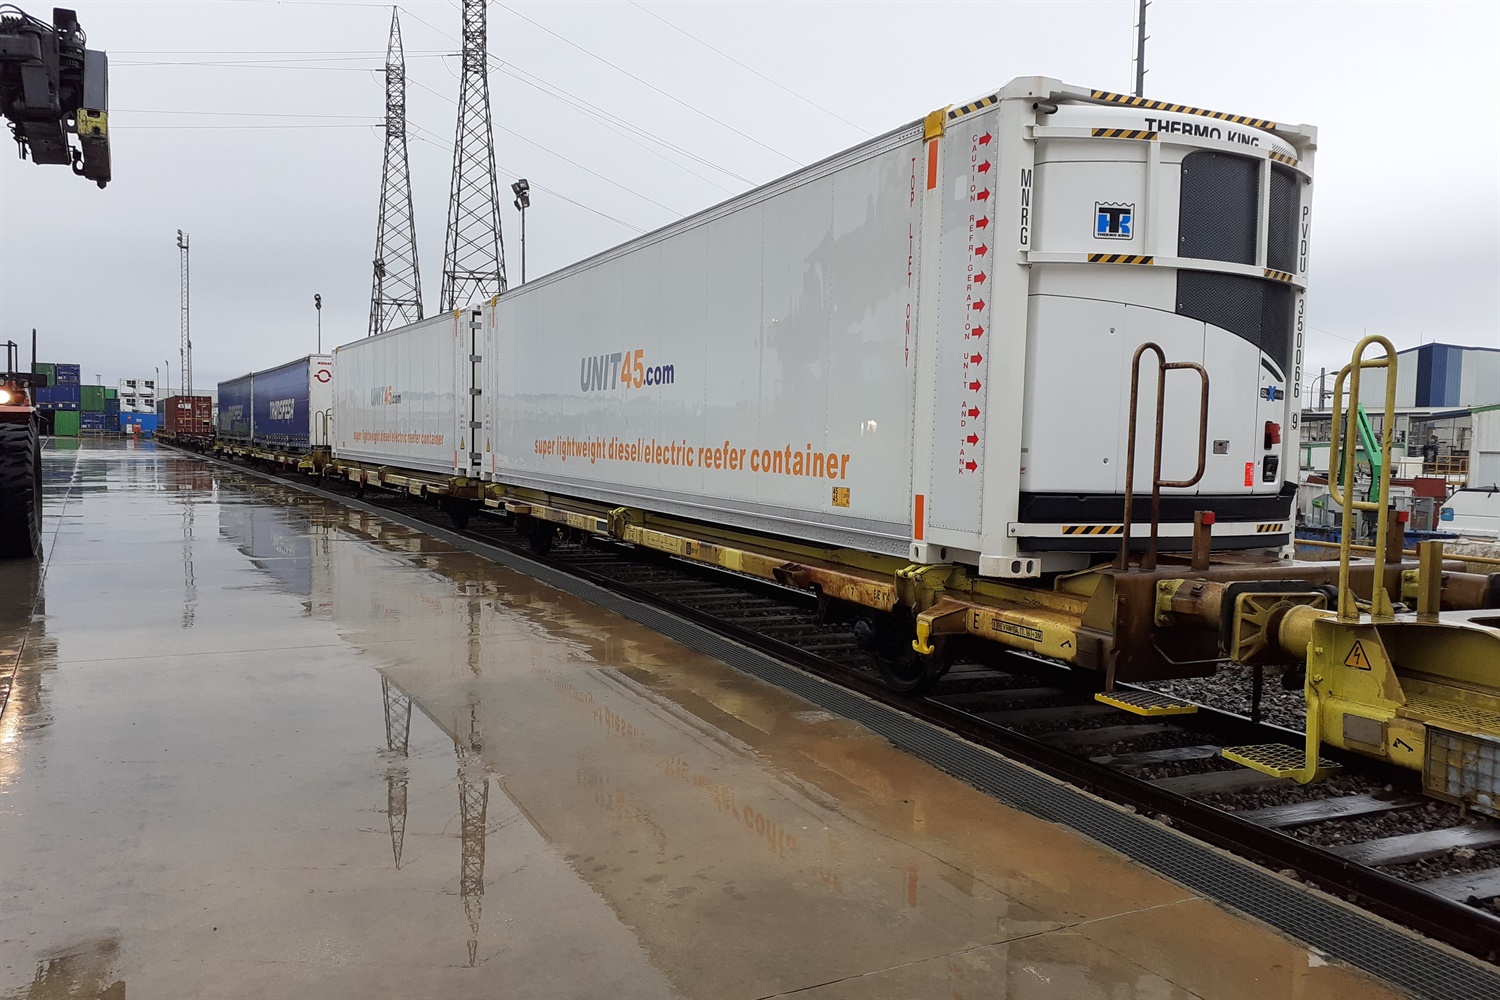 Network Rail aids London’s vital supermarket supplies with new freight route from Spain 